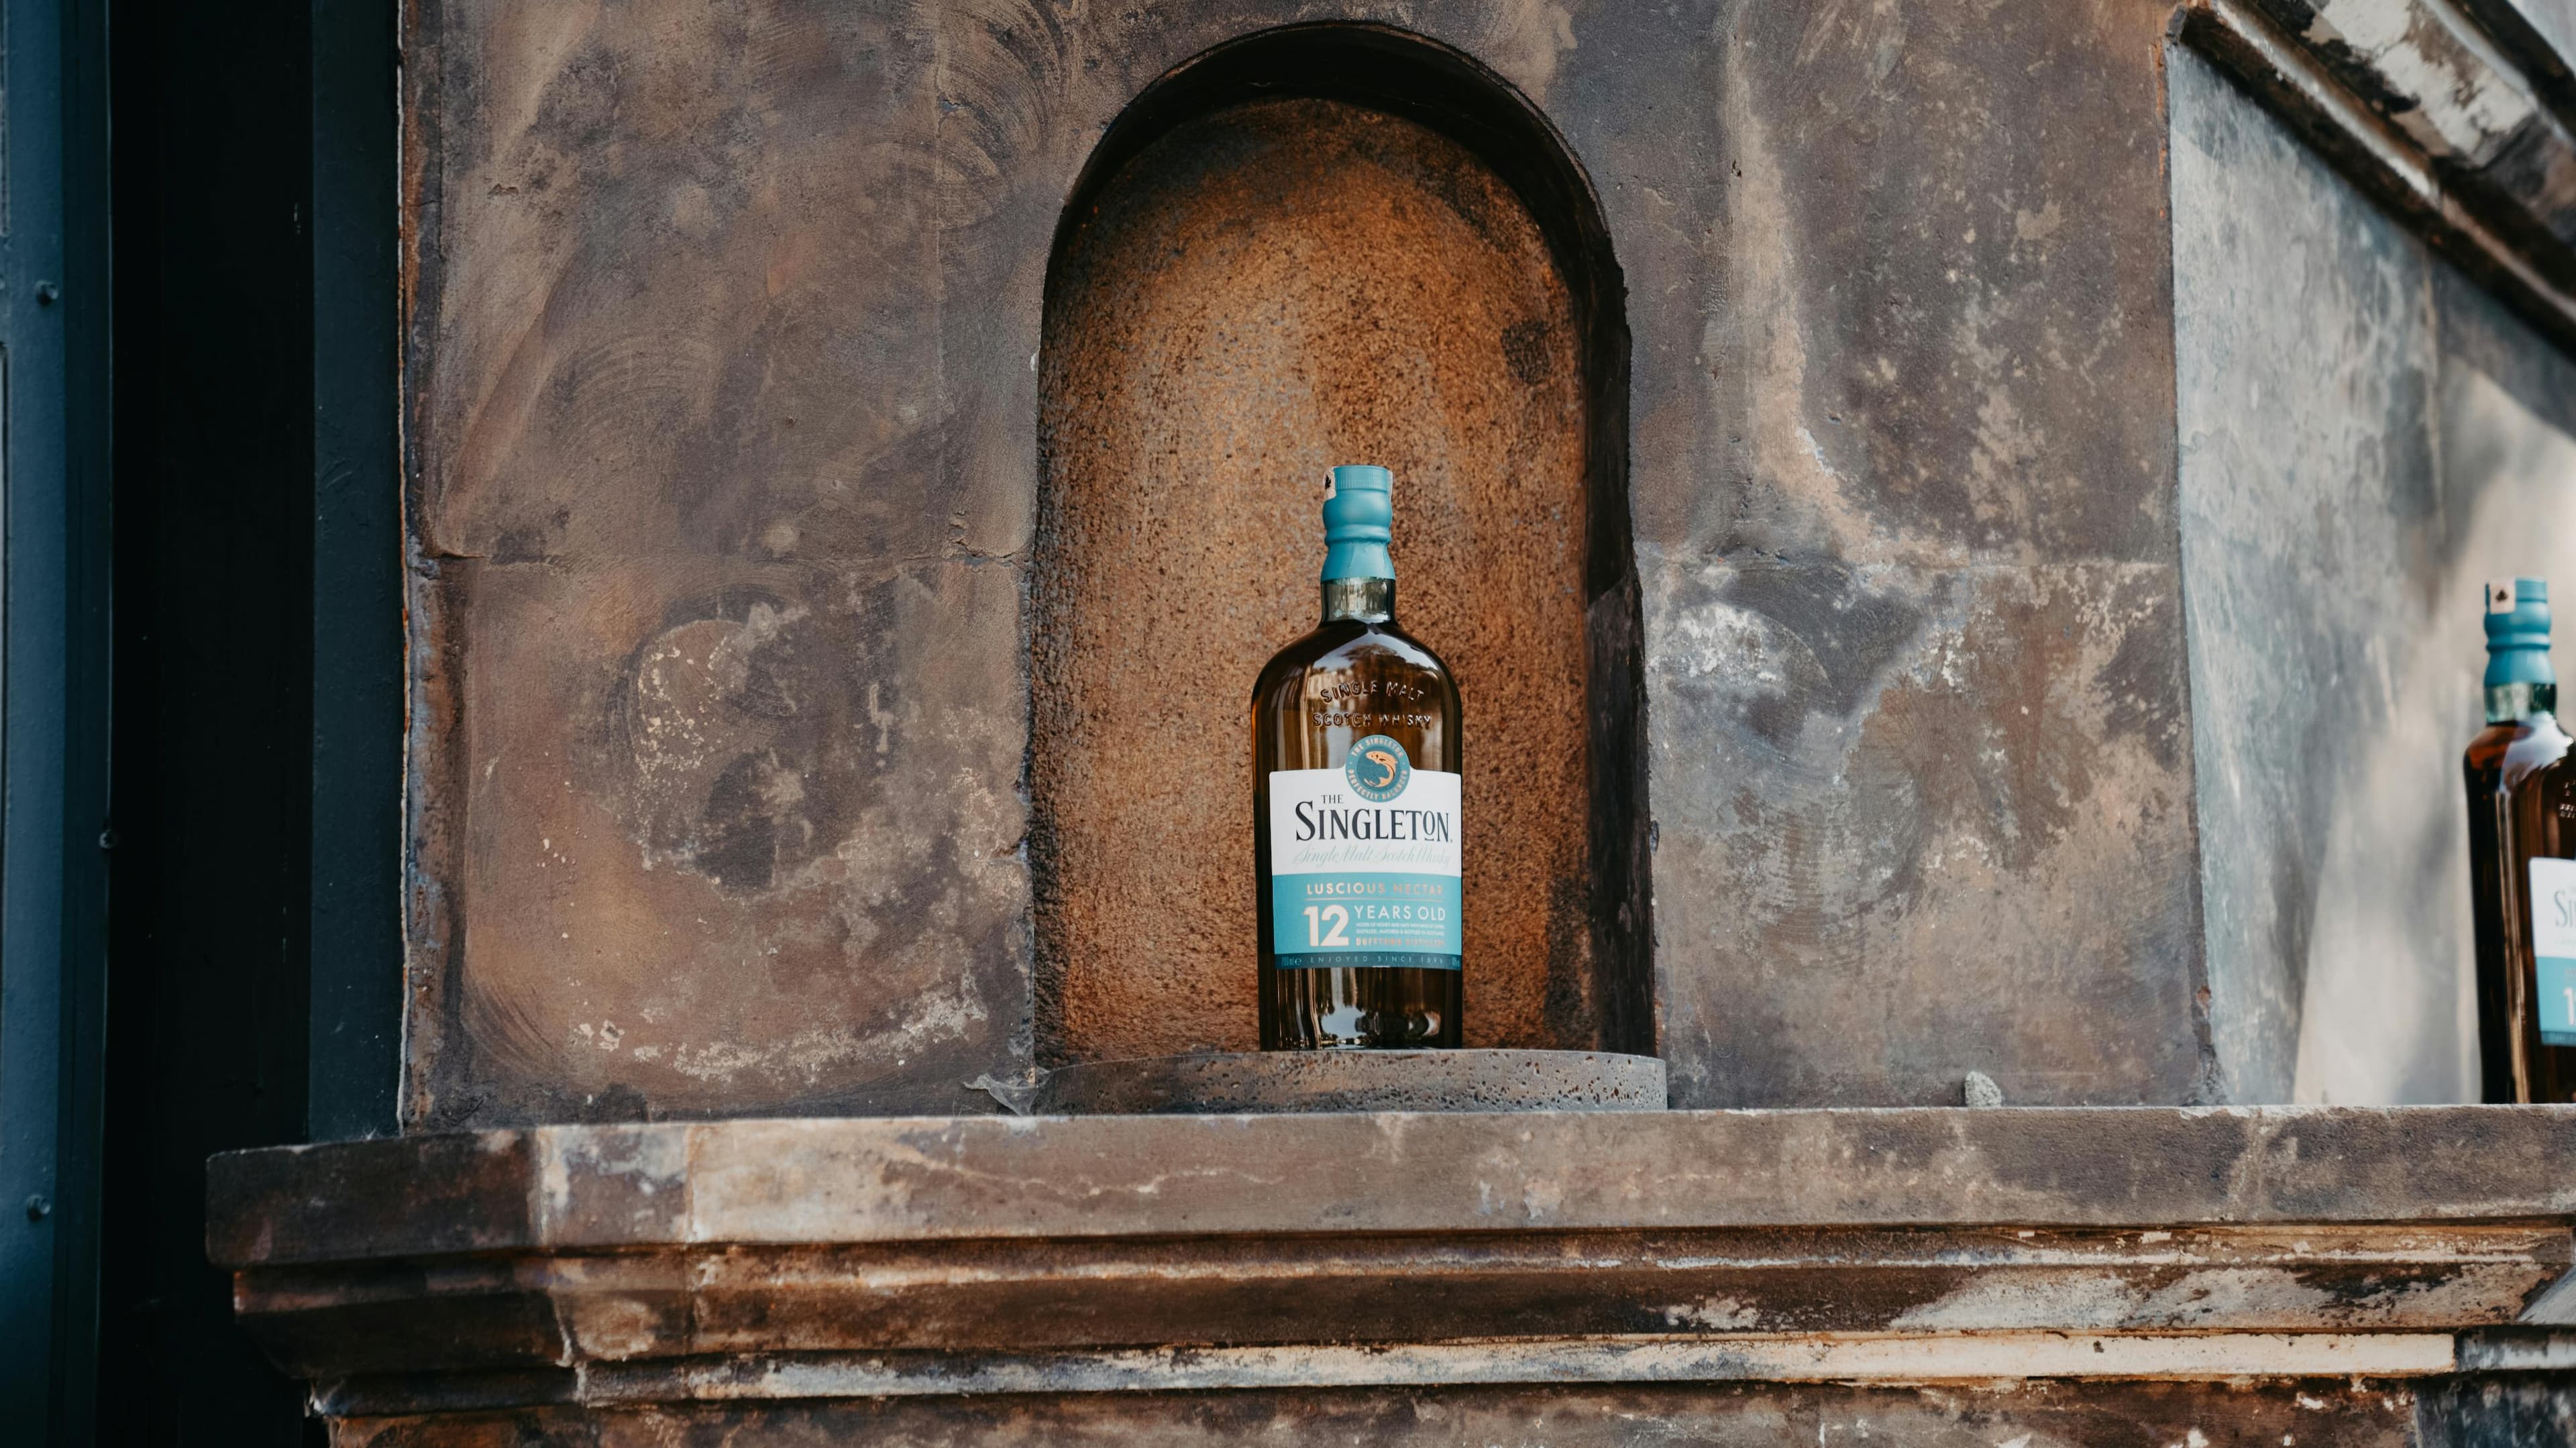 The Sensational Singleton: Why It’s A Single Malt That Stands Out